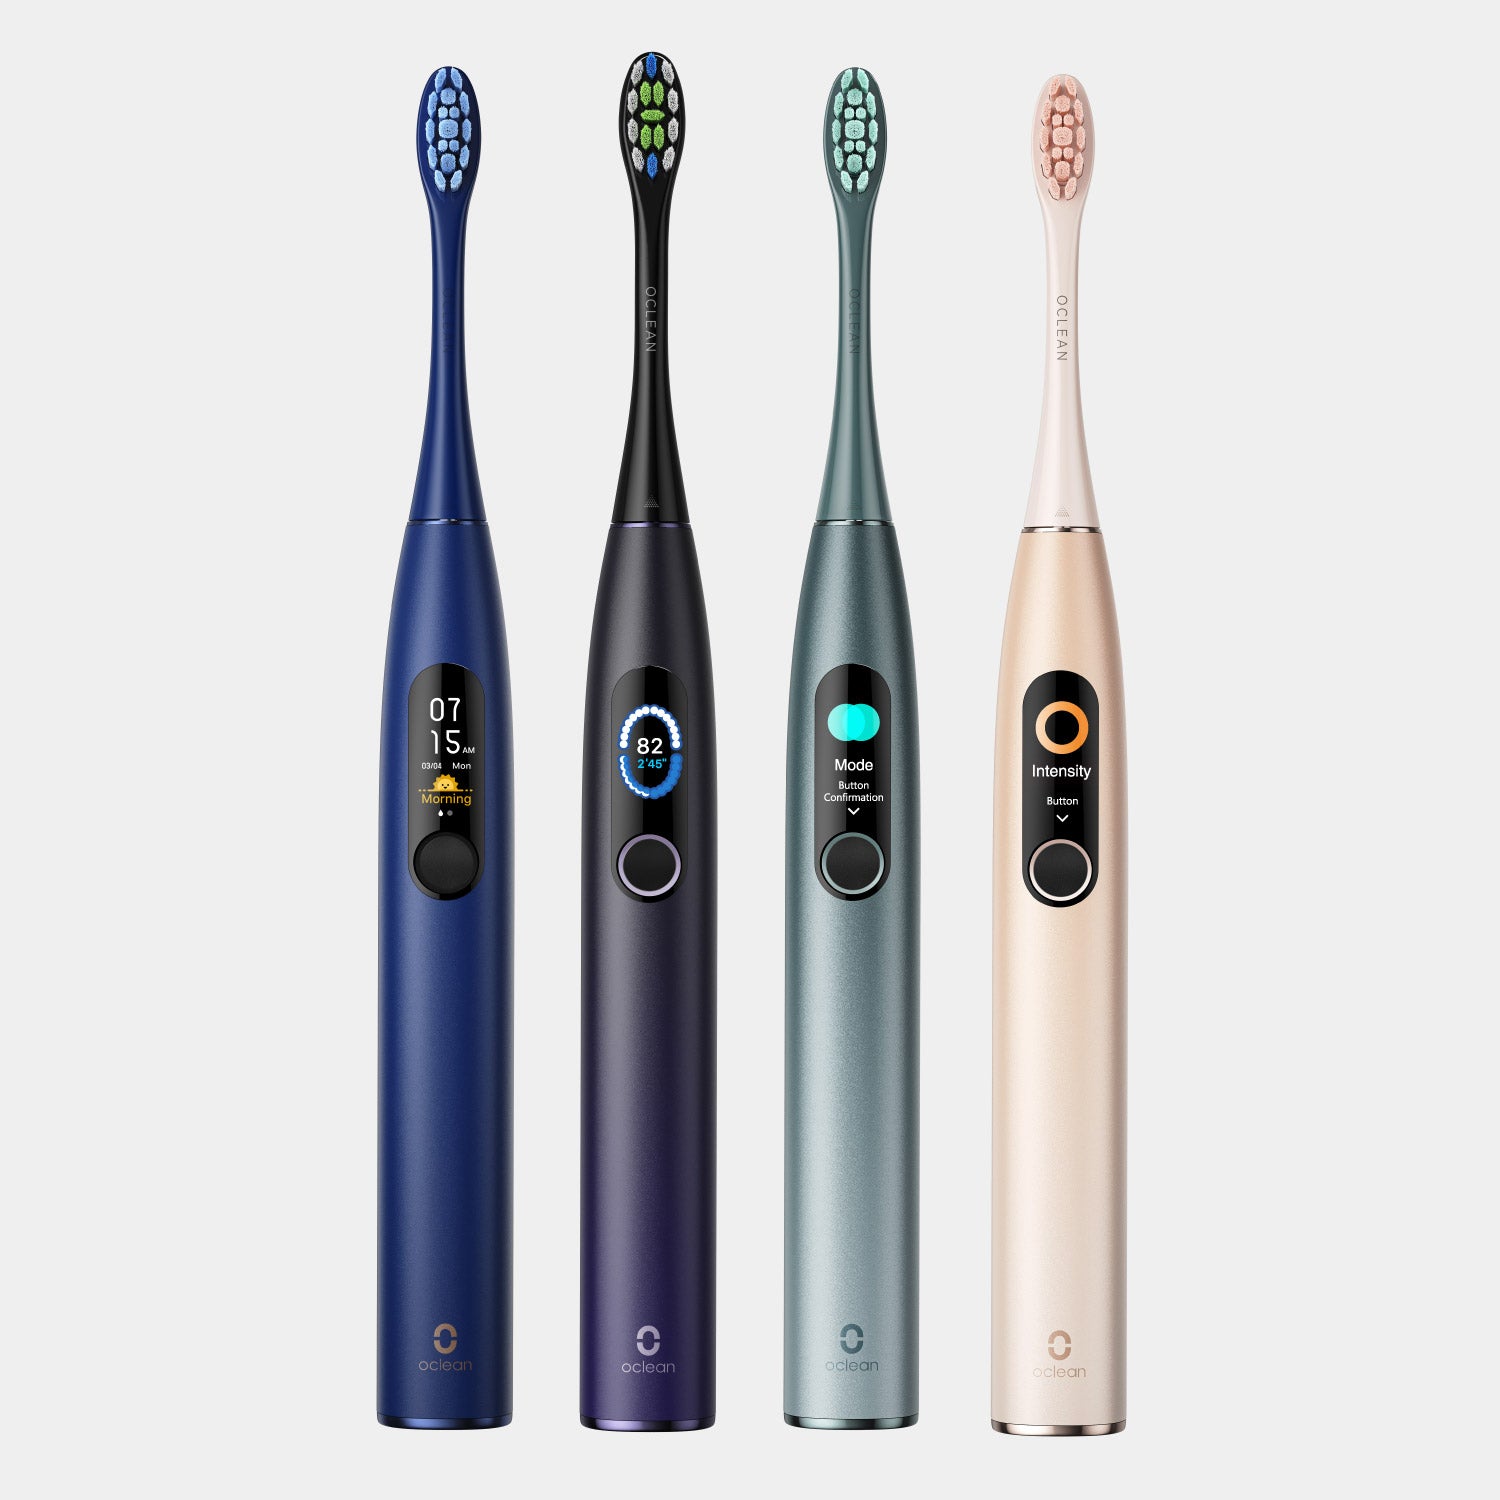 Oclean X Pro Sonic Electric Toothbrush-Toothbrushes-Oclean Global Store